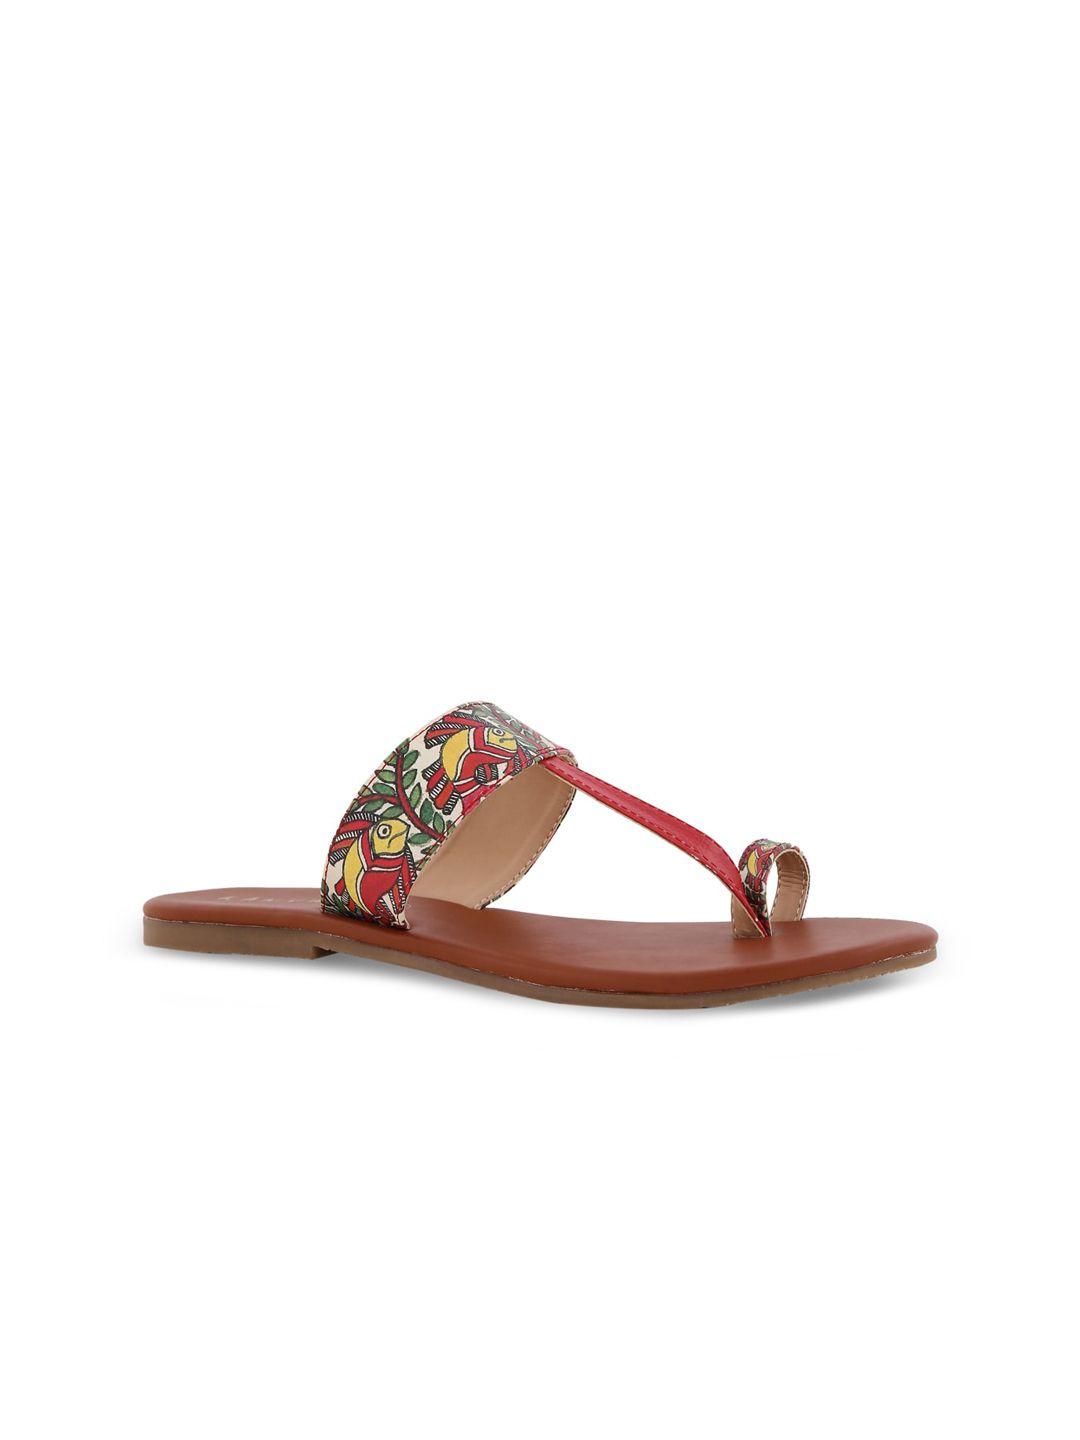 kanvas-women-printed-leather-no-back-strap-one-toe-flats